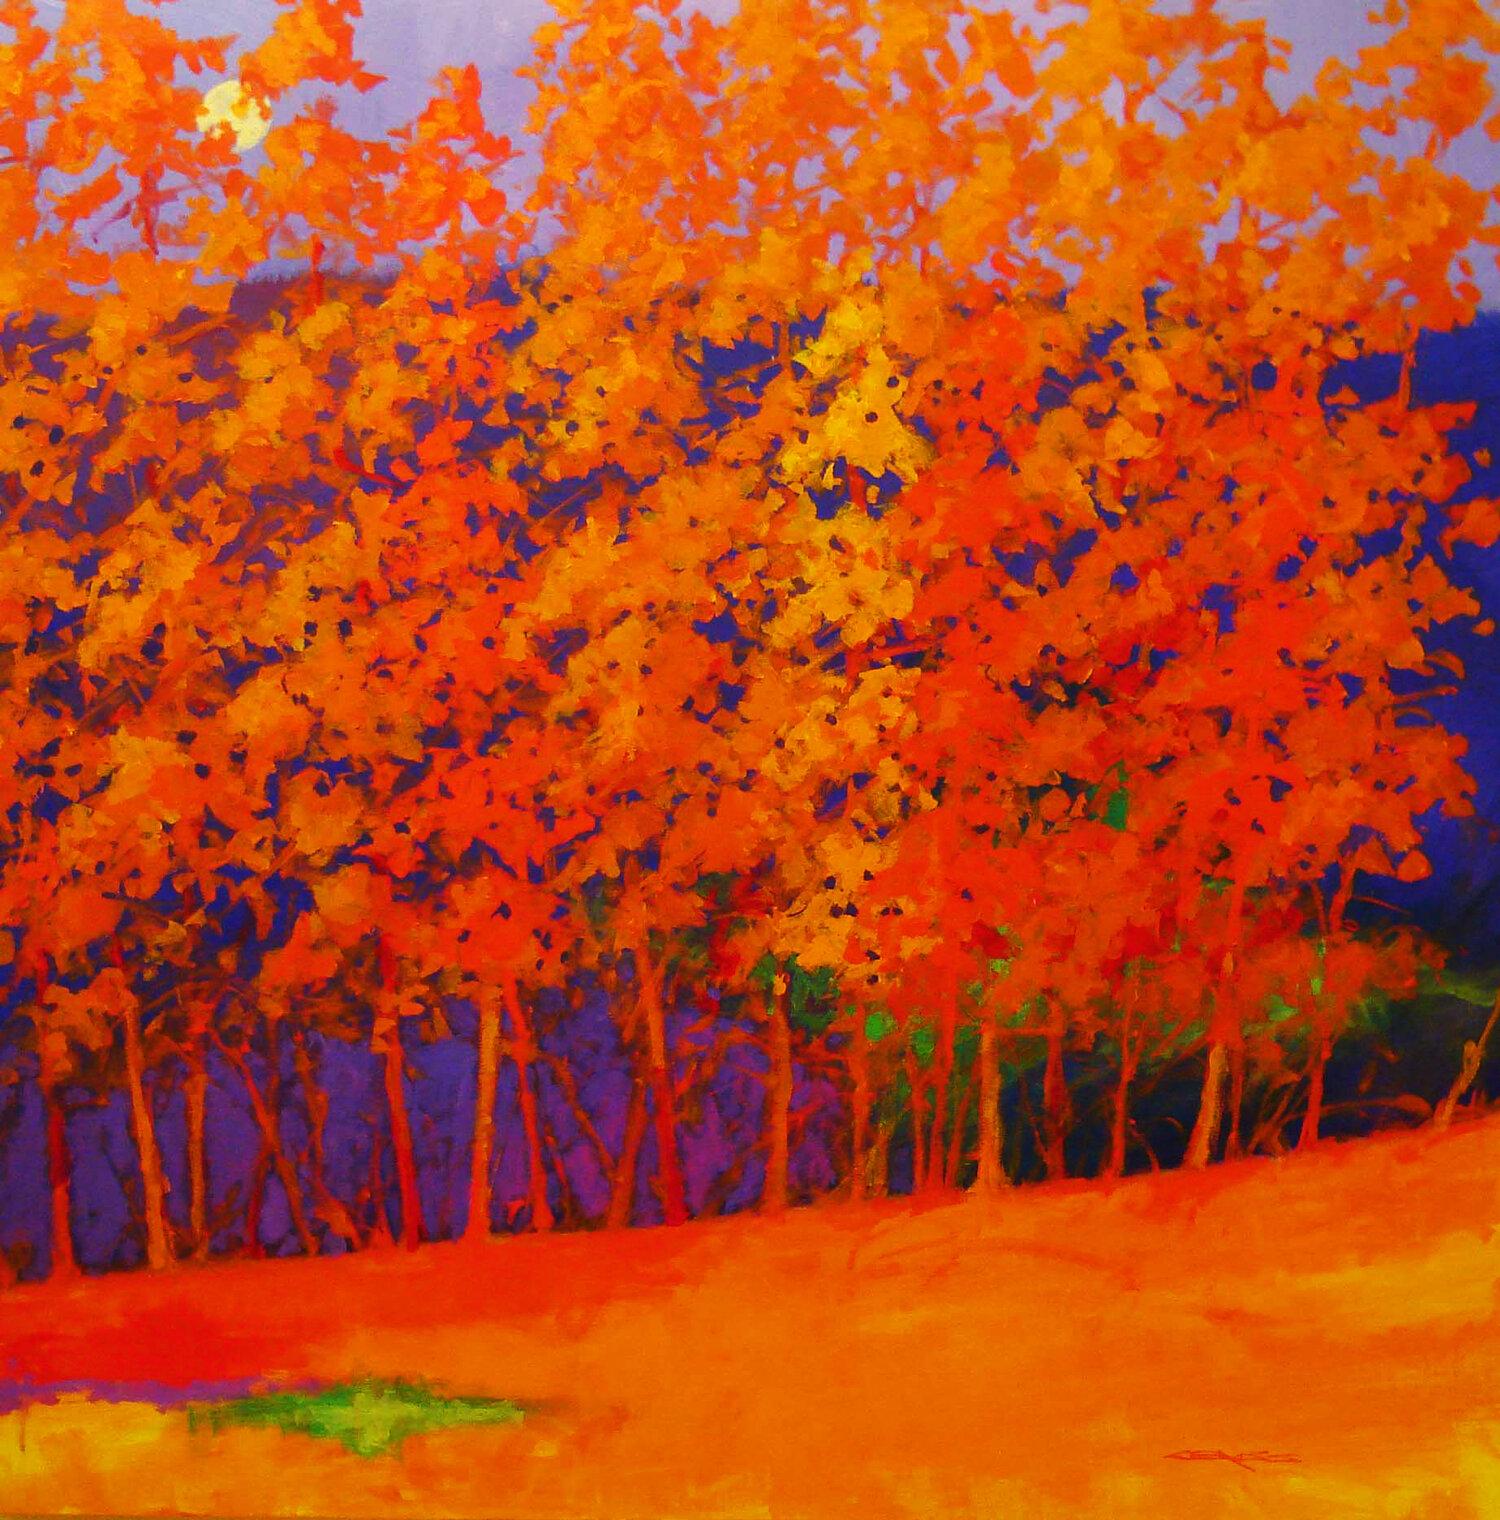 C.E. Ross, "Vibrant Day", Colorful Orange Purple Abstract Forest Landscape